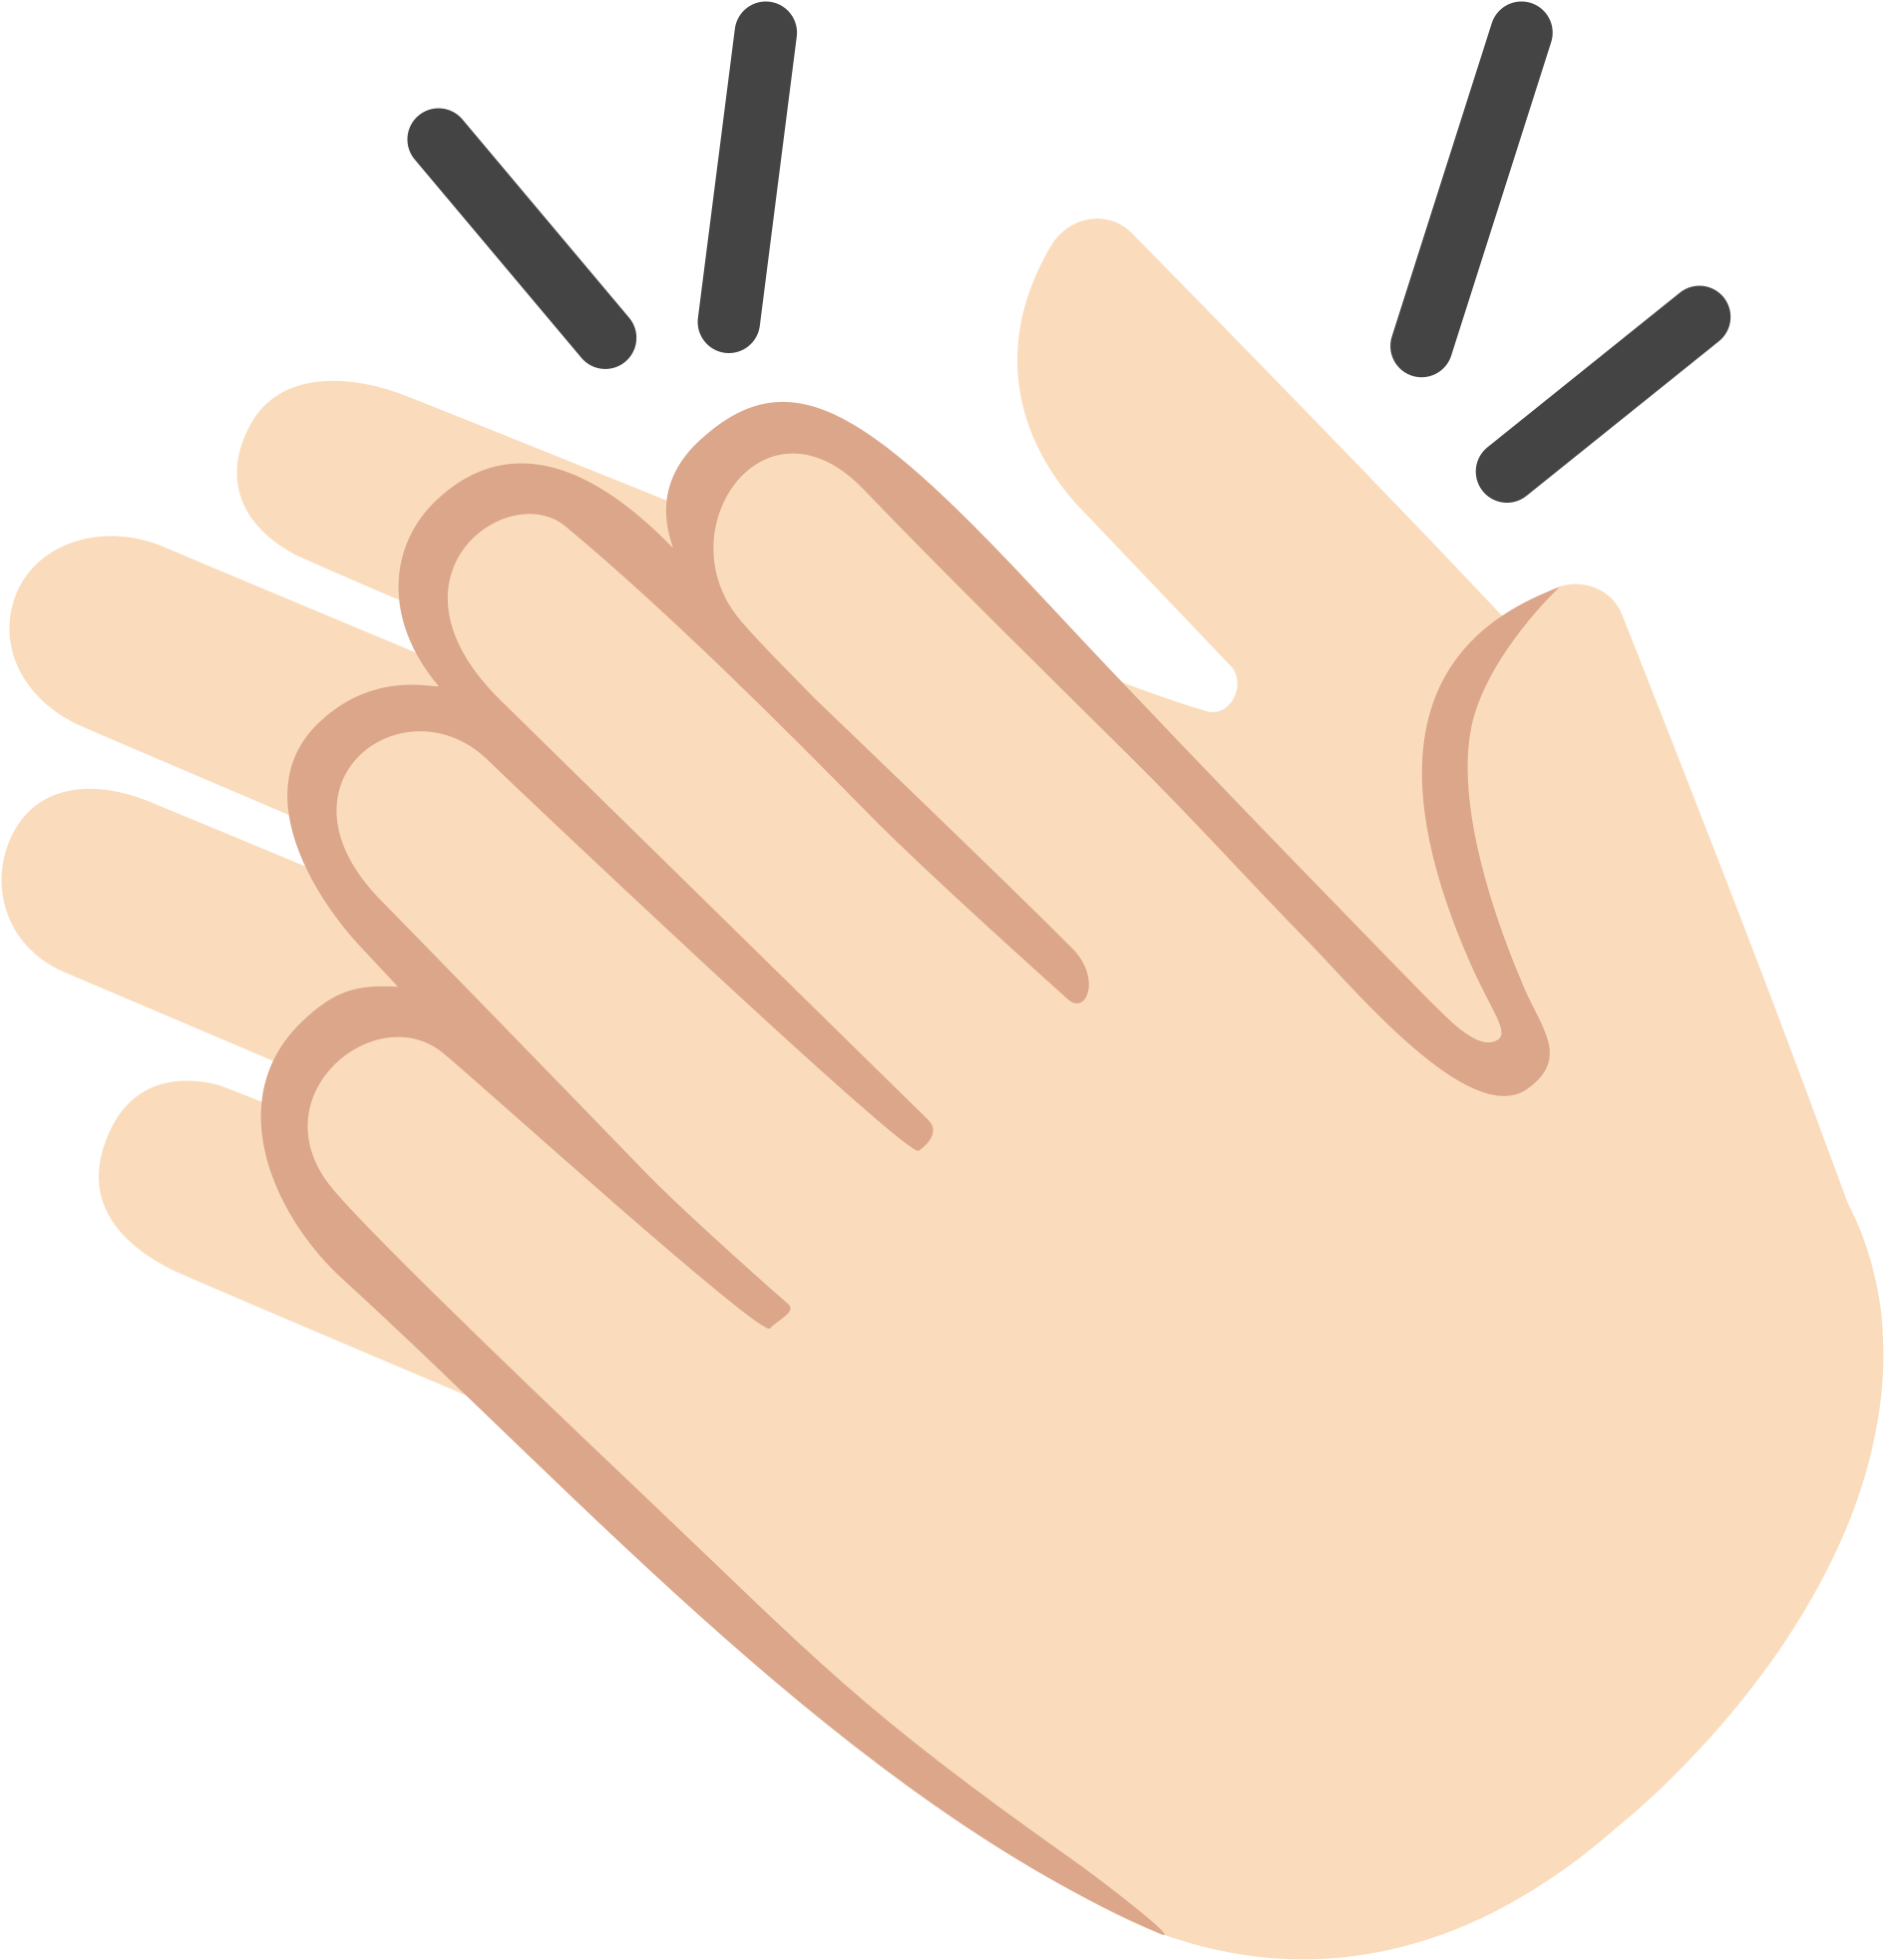 Applause Emoji PNG Picture